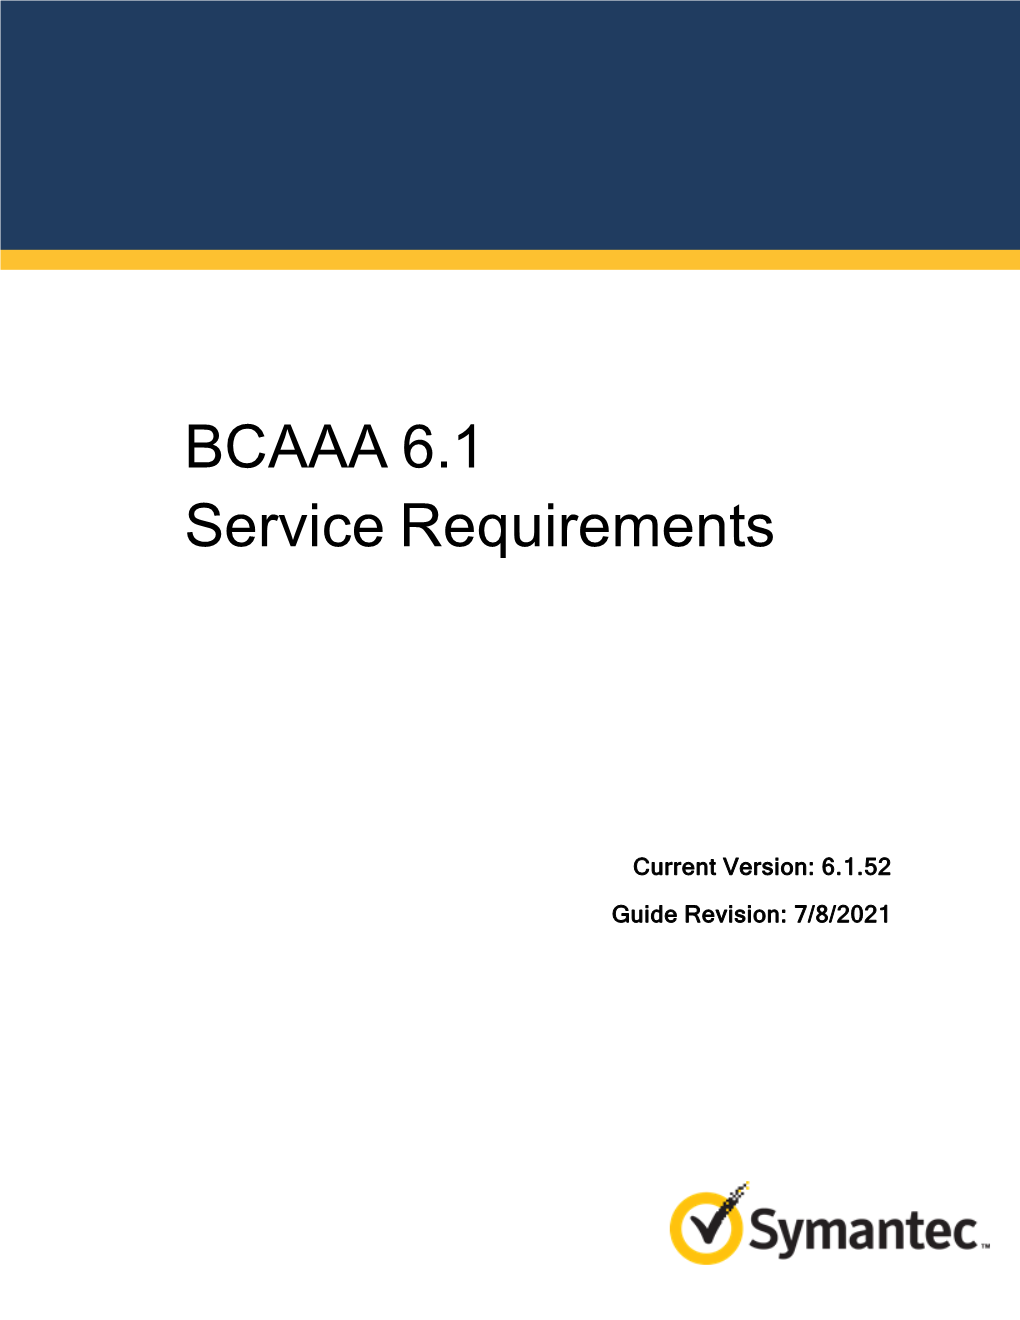 BCAAA 6.1 Service Requirements